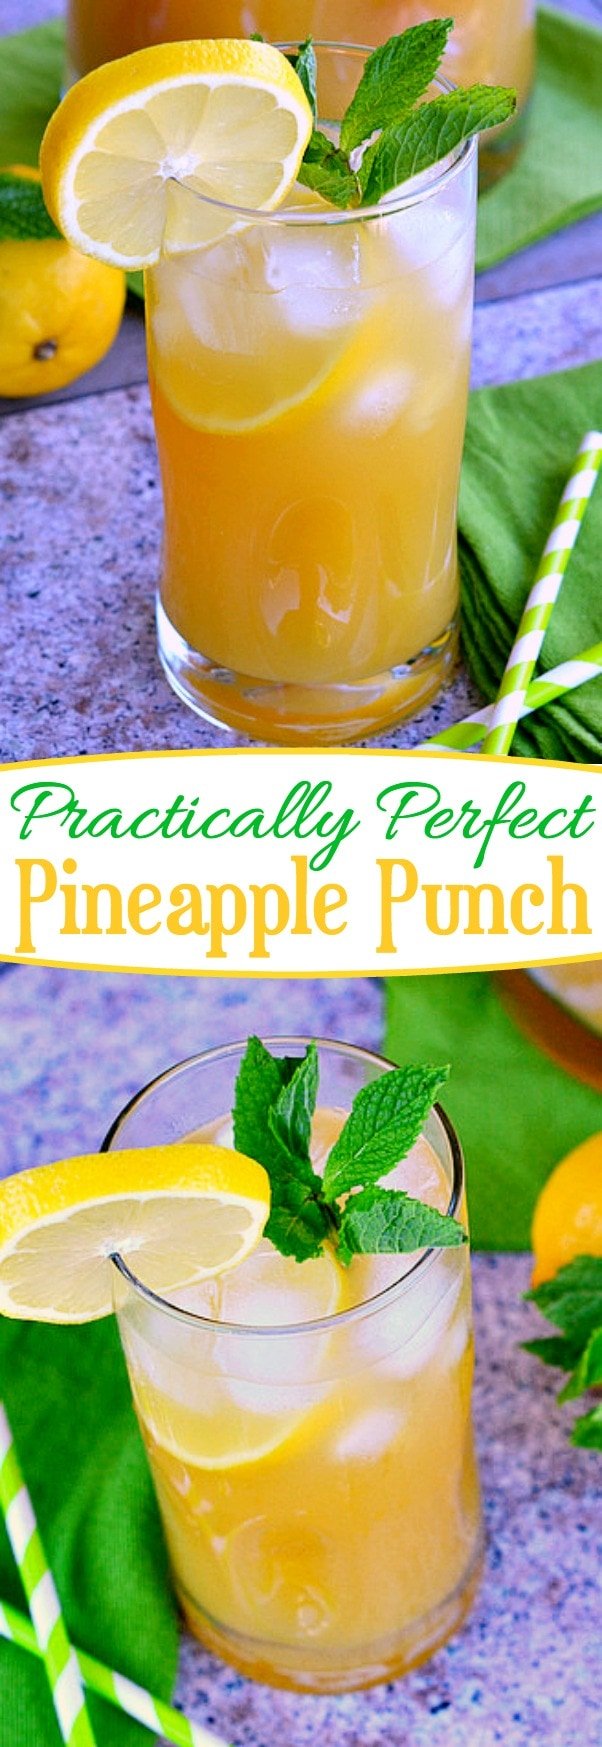 Practically Perfect Pineapple Punch is totally refreshing on a hot summer day! Cocktail or punch - it's your choice! // Mom On Timeout